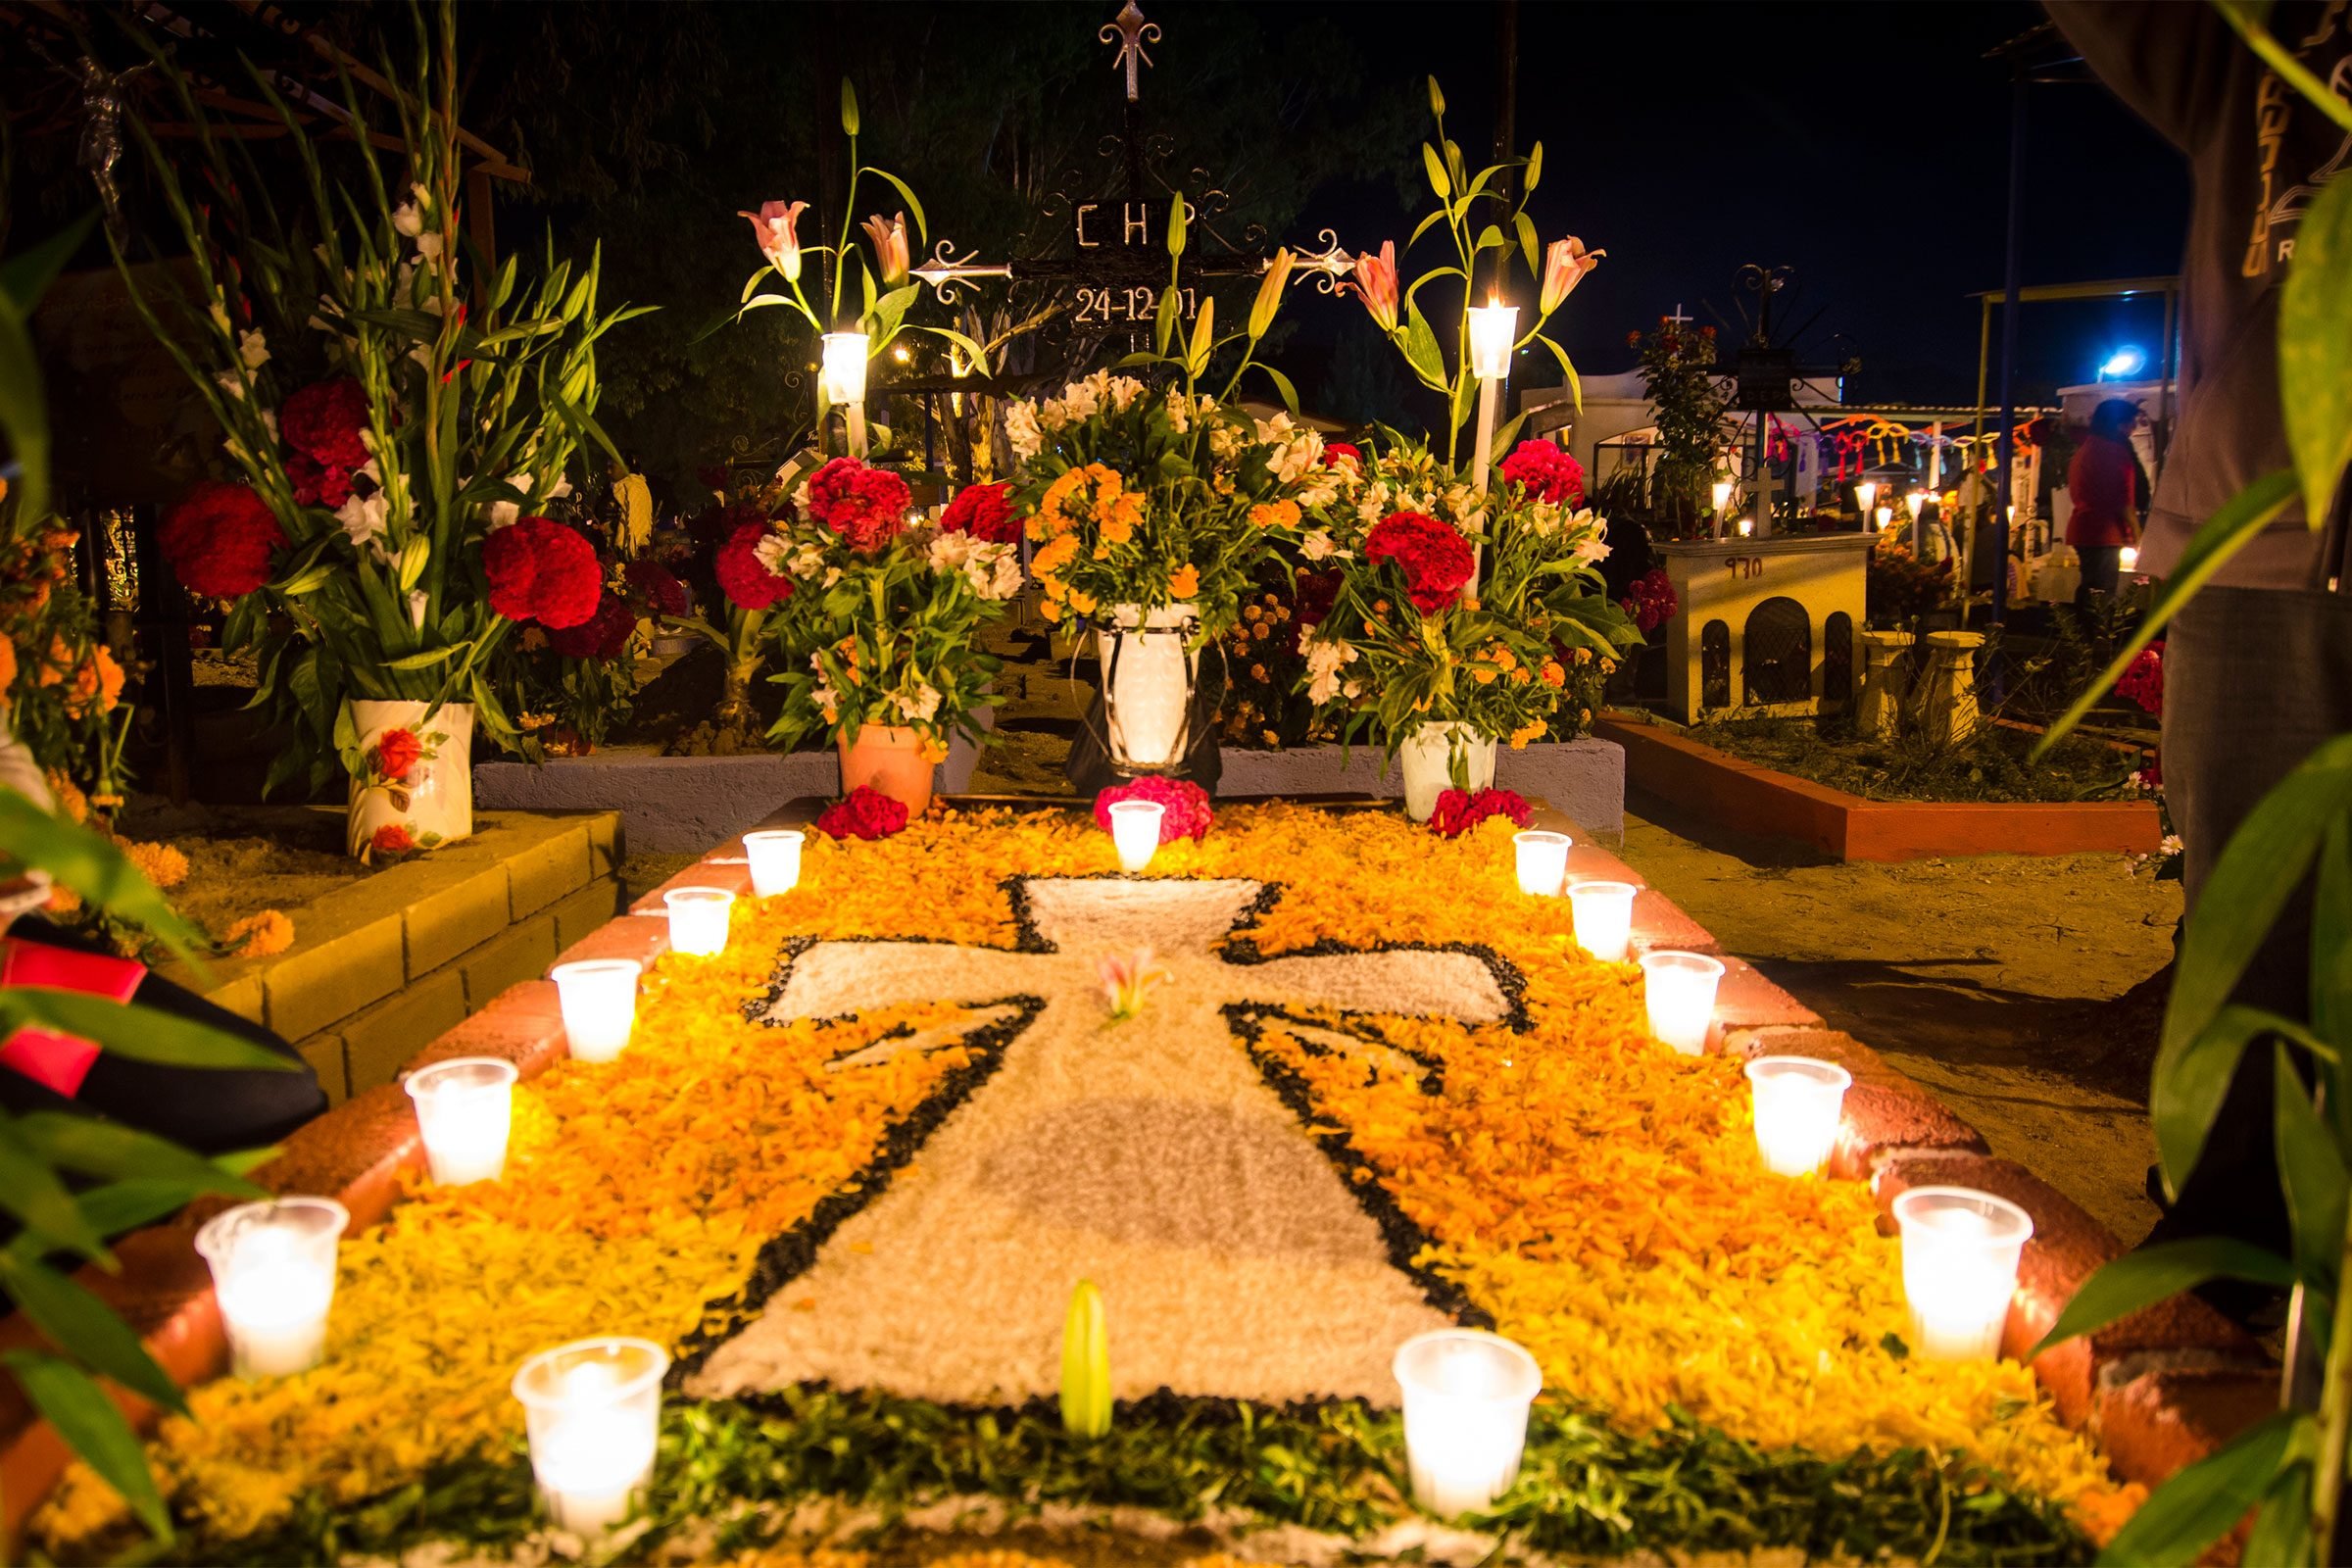 7 Spooky Facts About the Day of the Dead | Reader's Digest